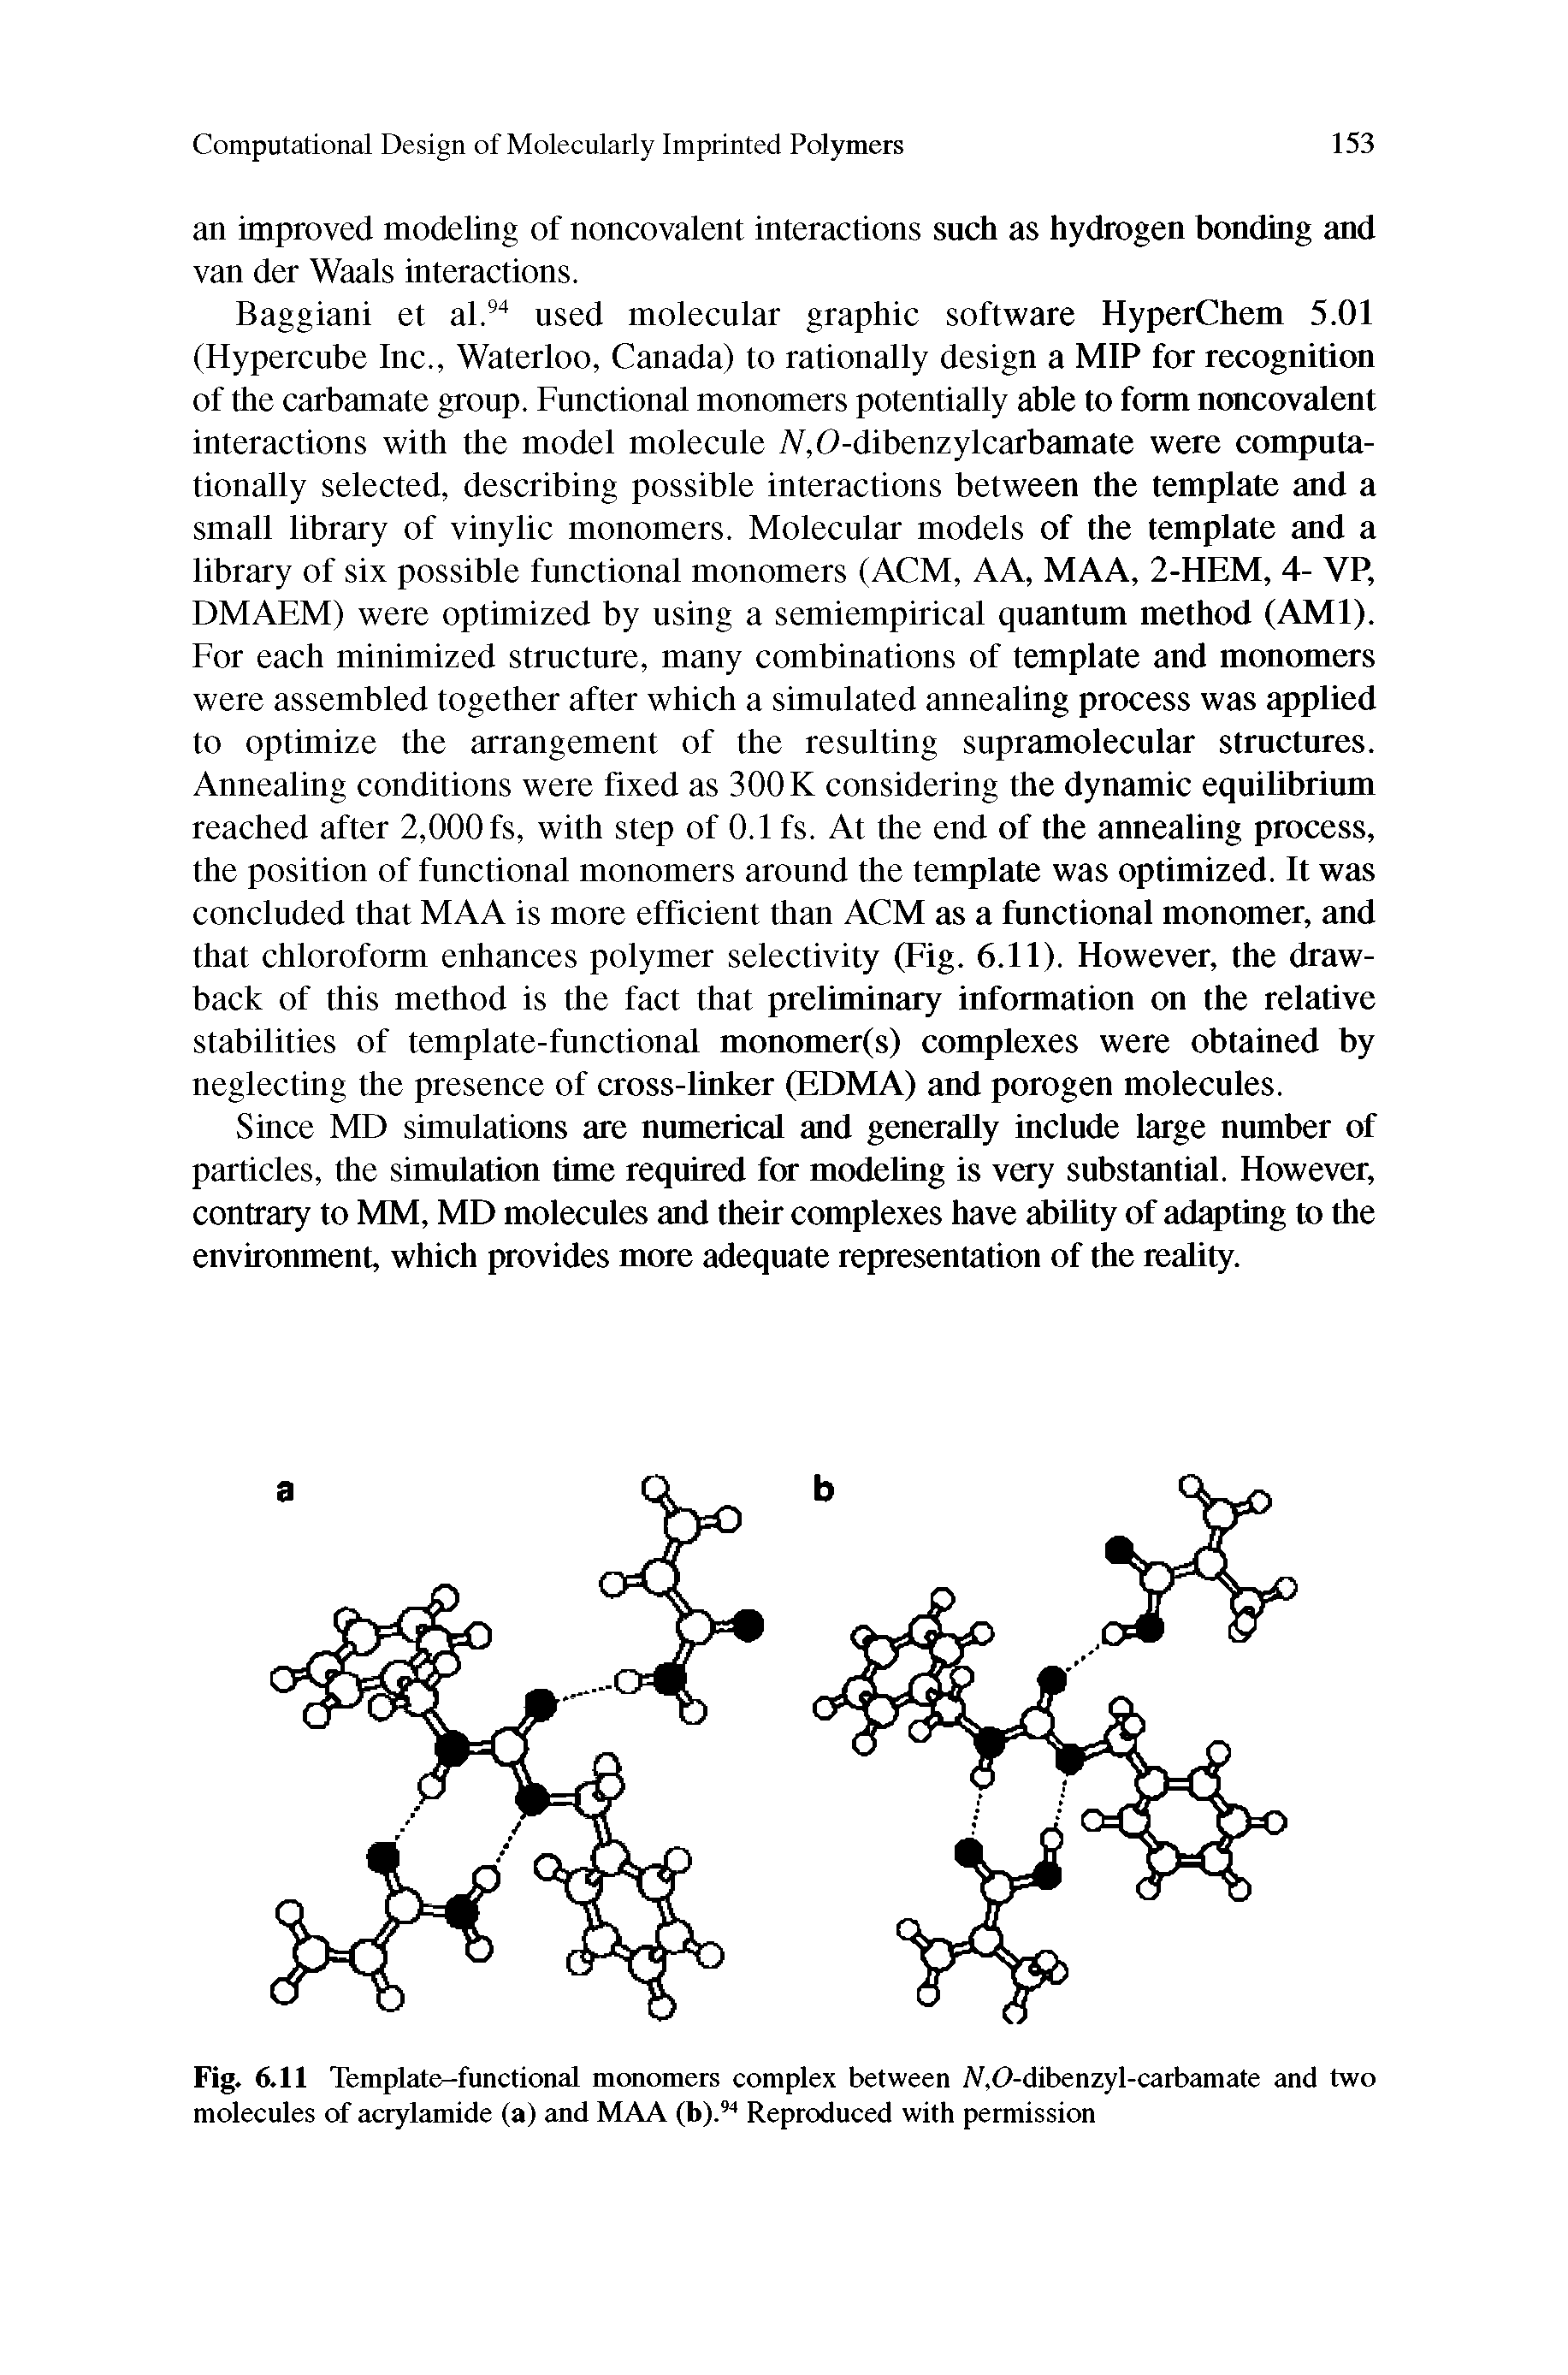 Fig. 6.11 Template-functional monomers complex between /V.O-dibenzyl-carbamate and two molecules of acrylamide (a) and MAA (b).94 Reproduced with permission...